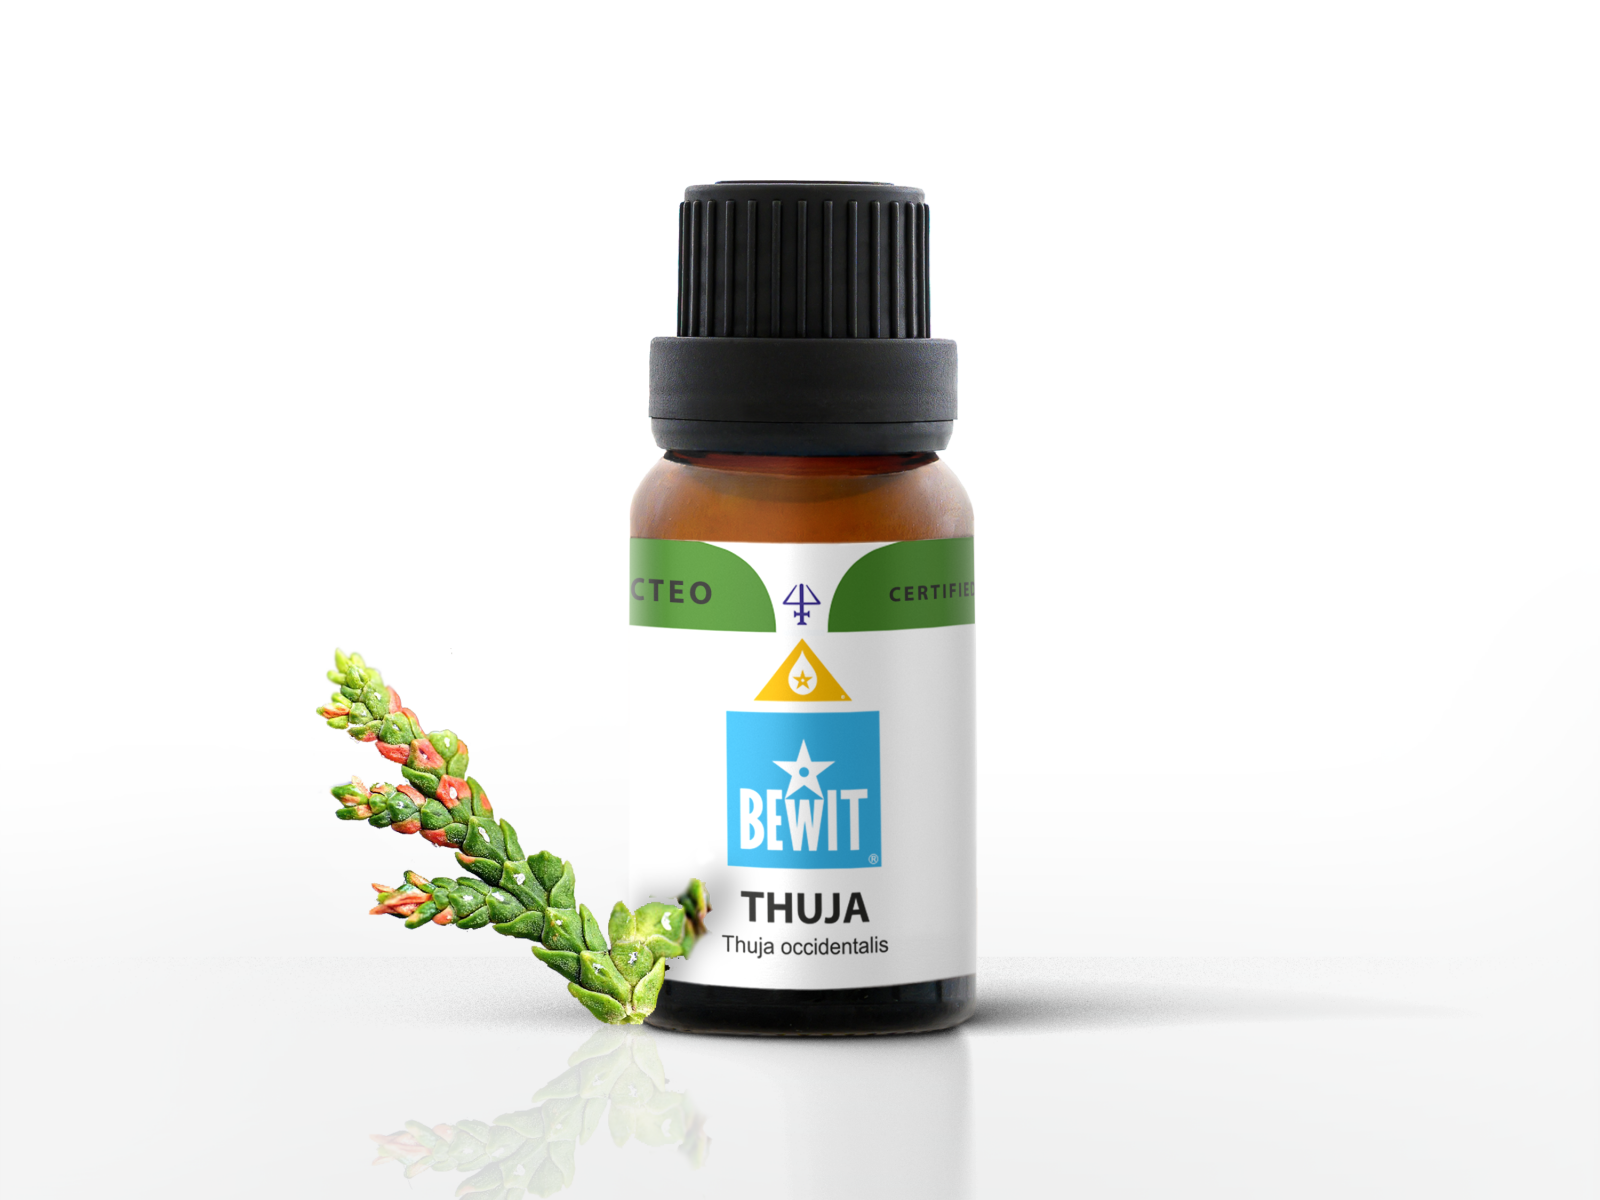 BEWIT Thuja - 100% pure essential oil